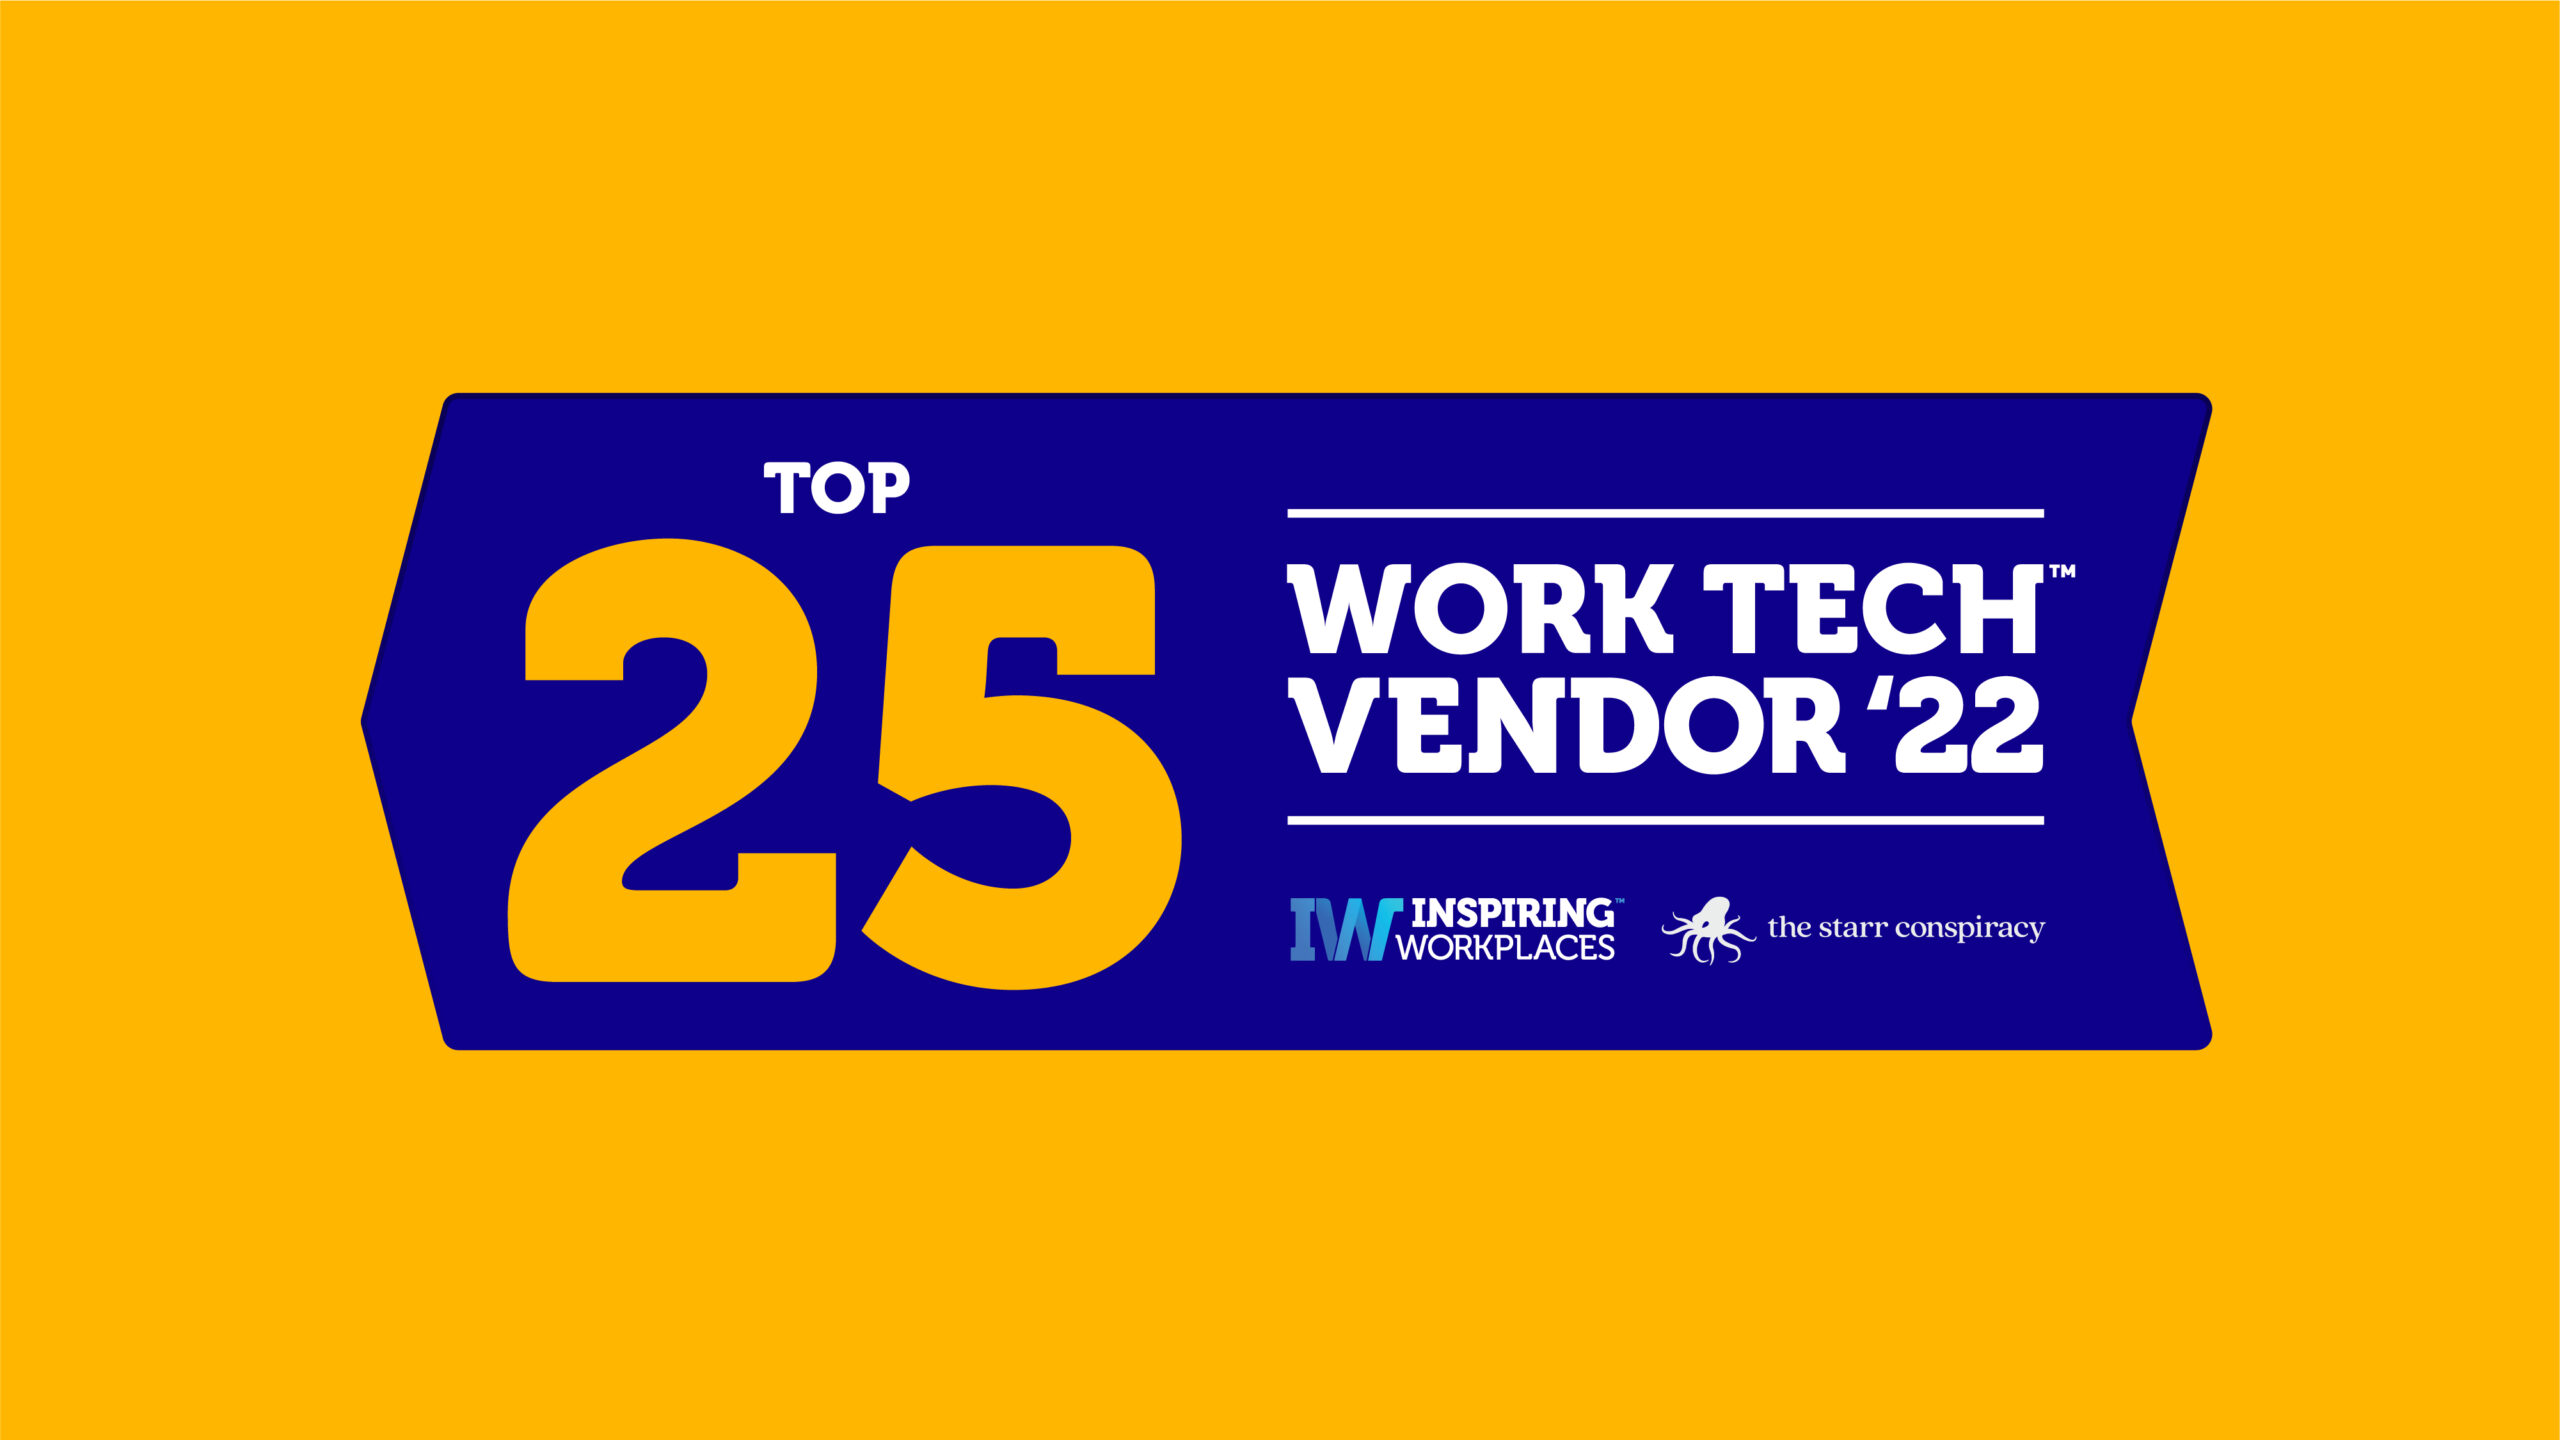 The inaugural Top 25 Work Tech Vendor list announced today